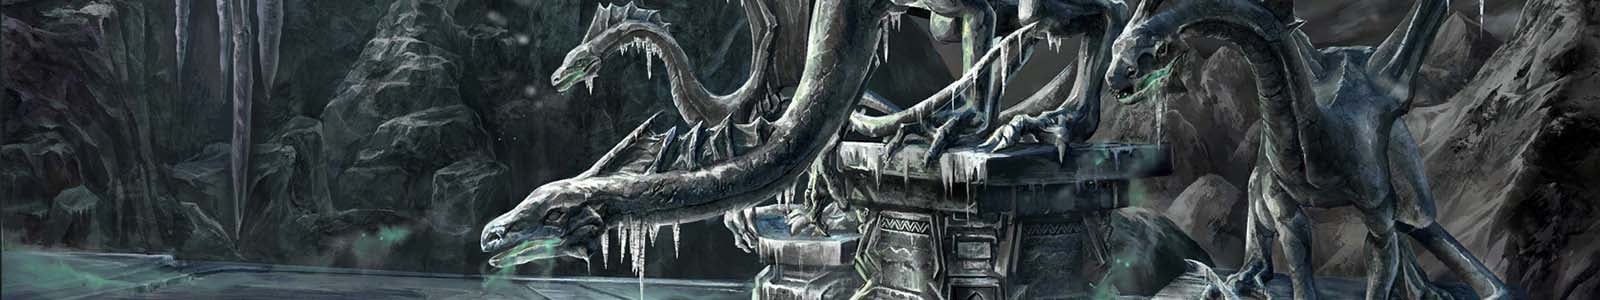 Dungeon Guides for ESO header